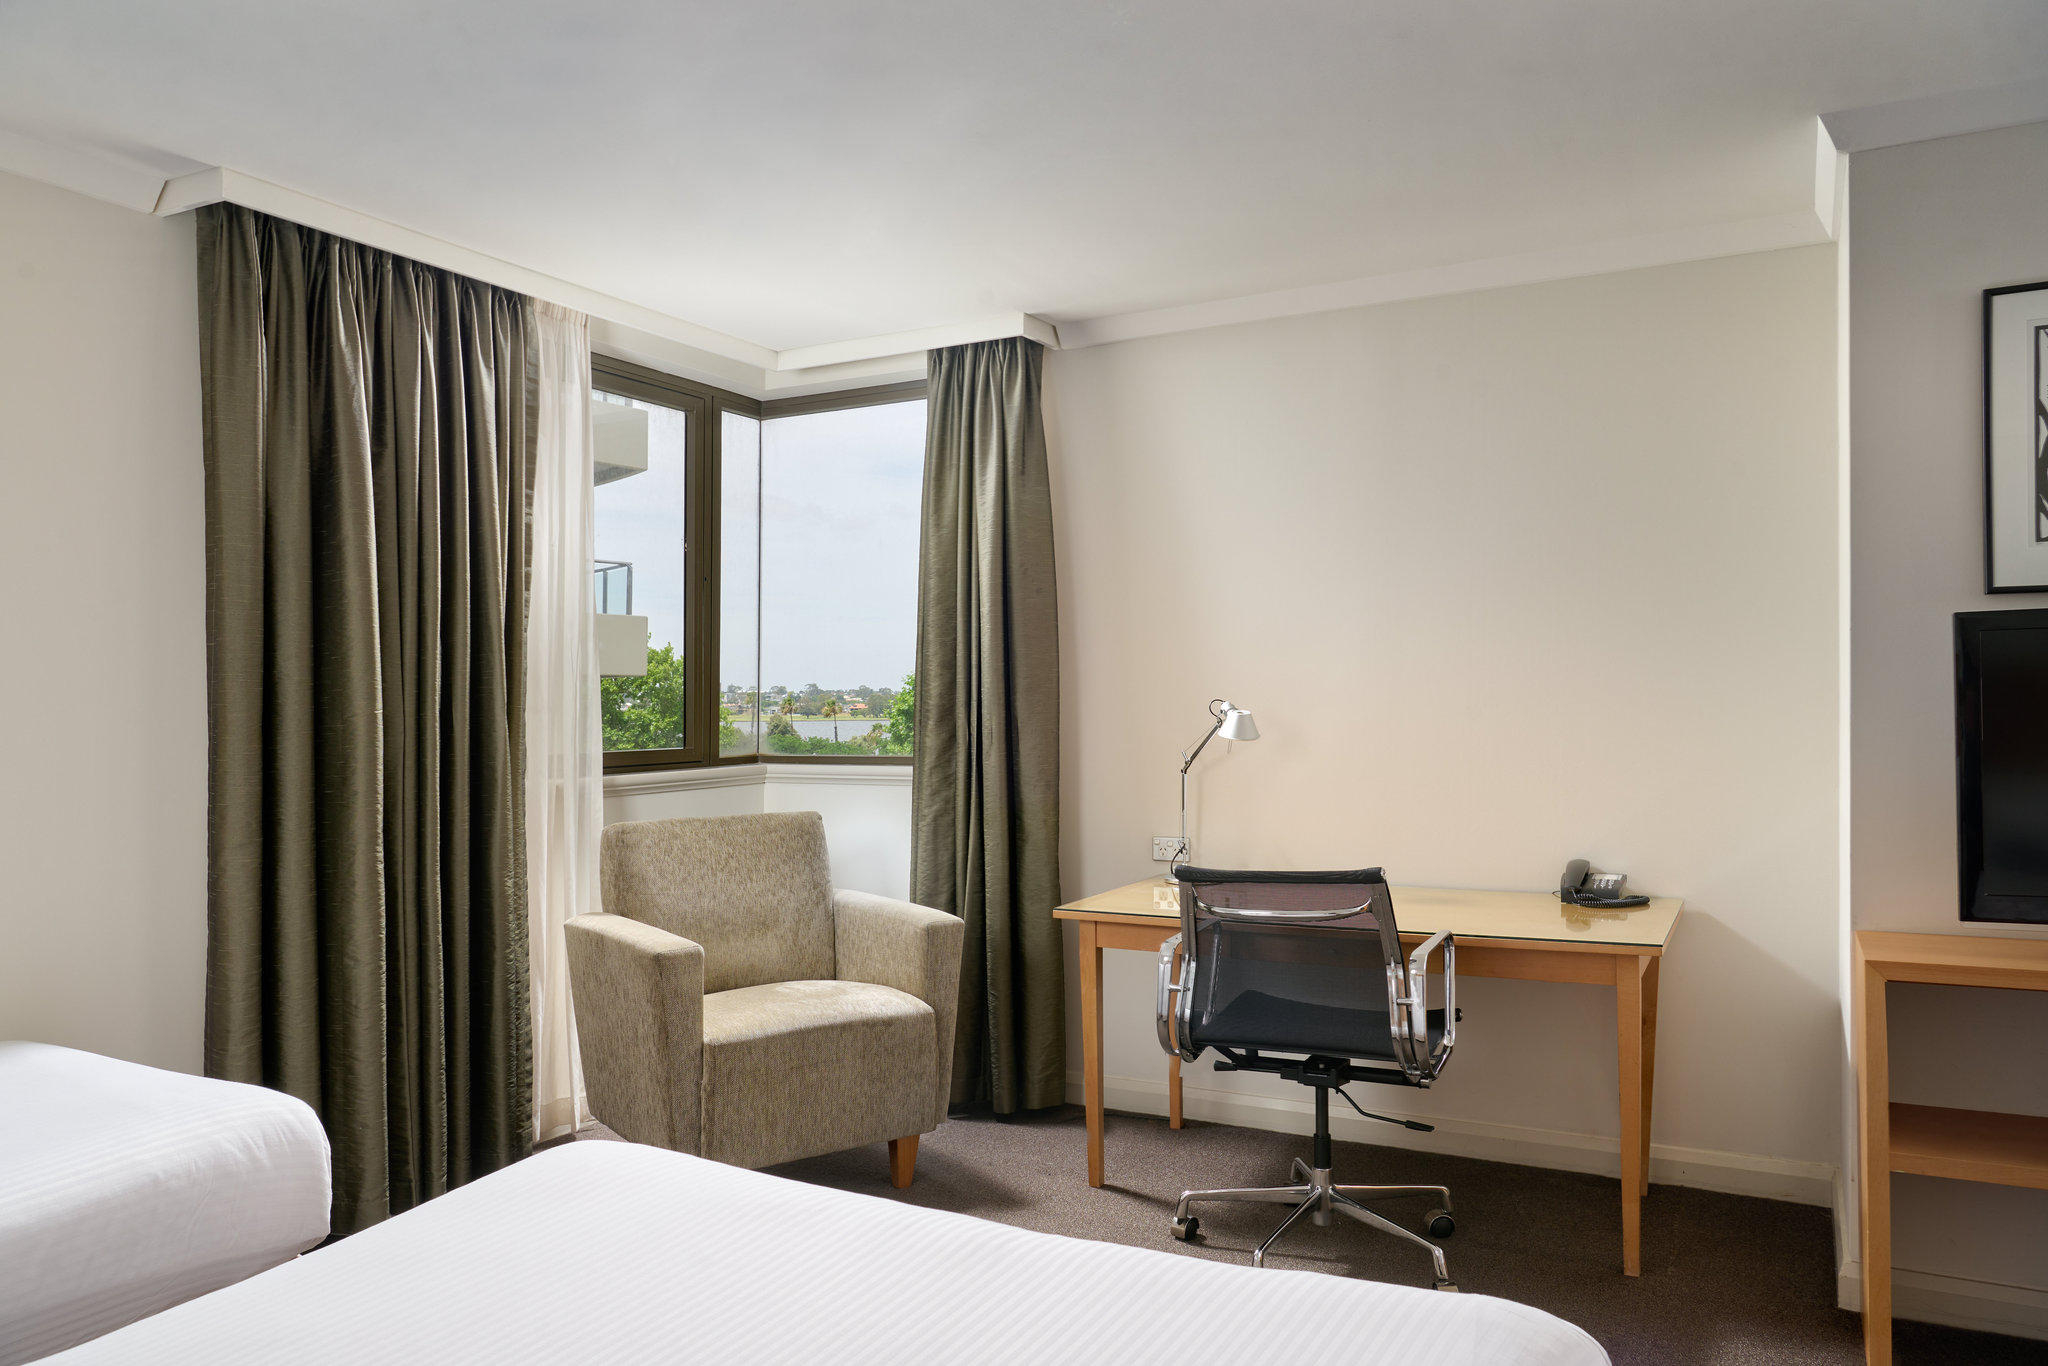 Images Crowne Plaza Perth, an IHG Hotel